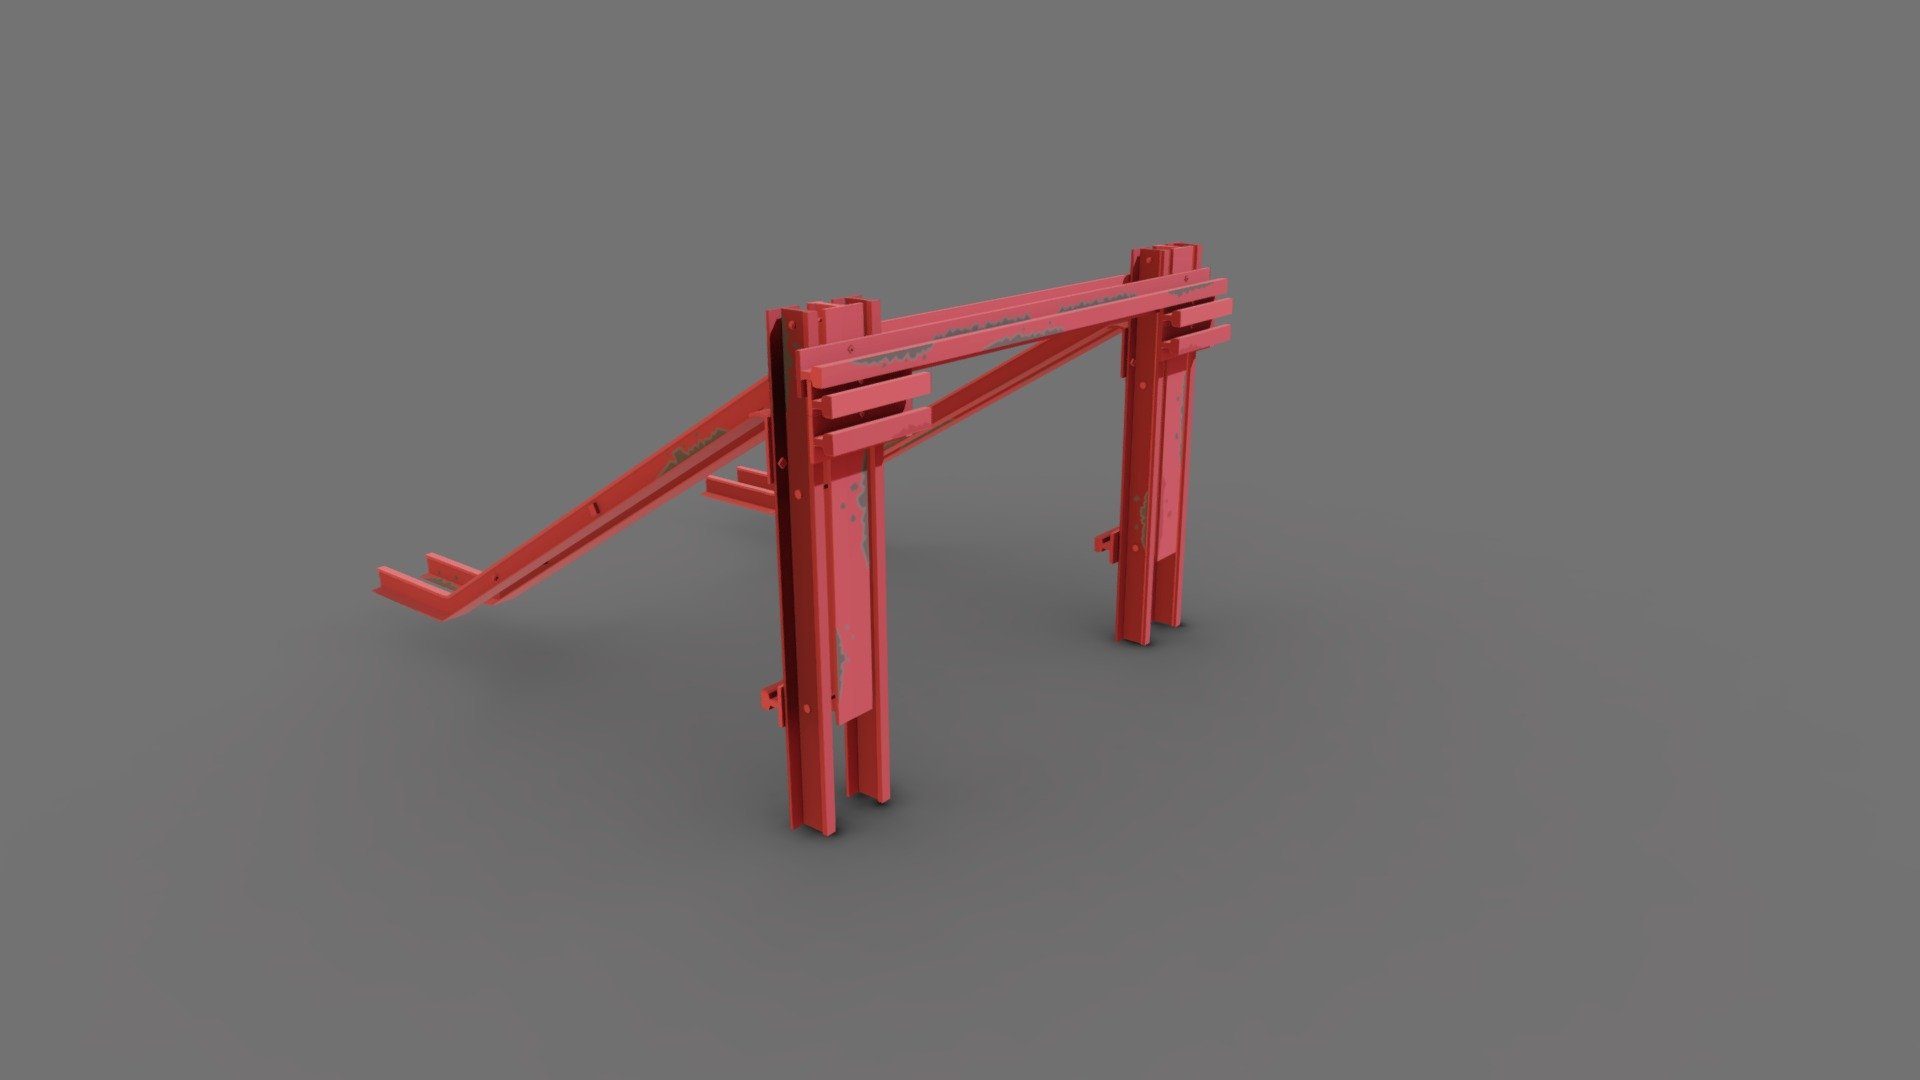 This is an old railway barrier used at the end of rail road 3d model